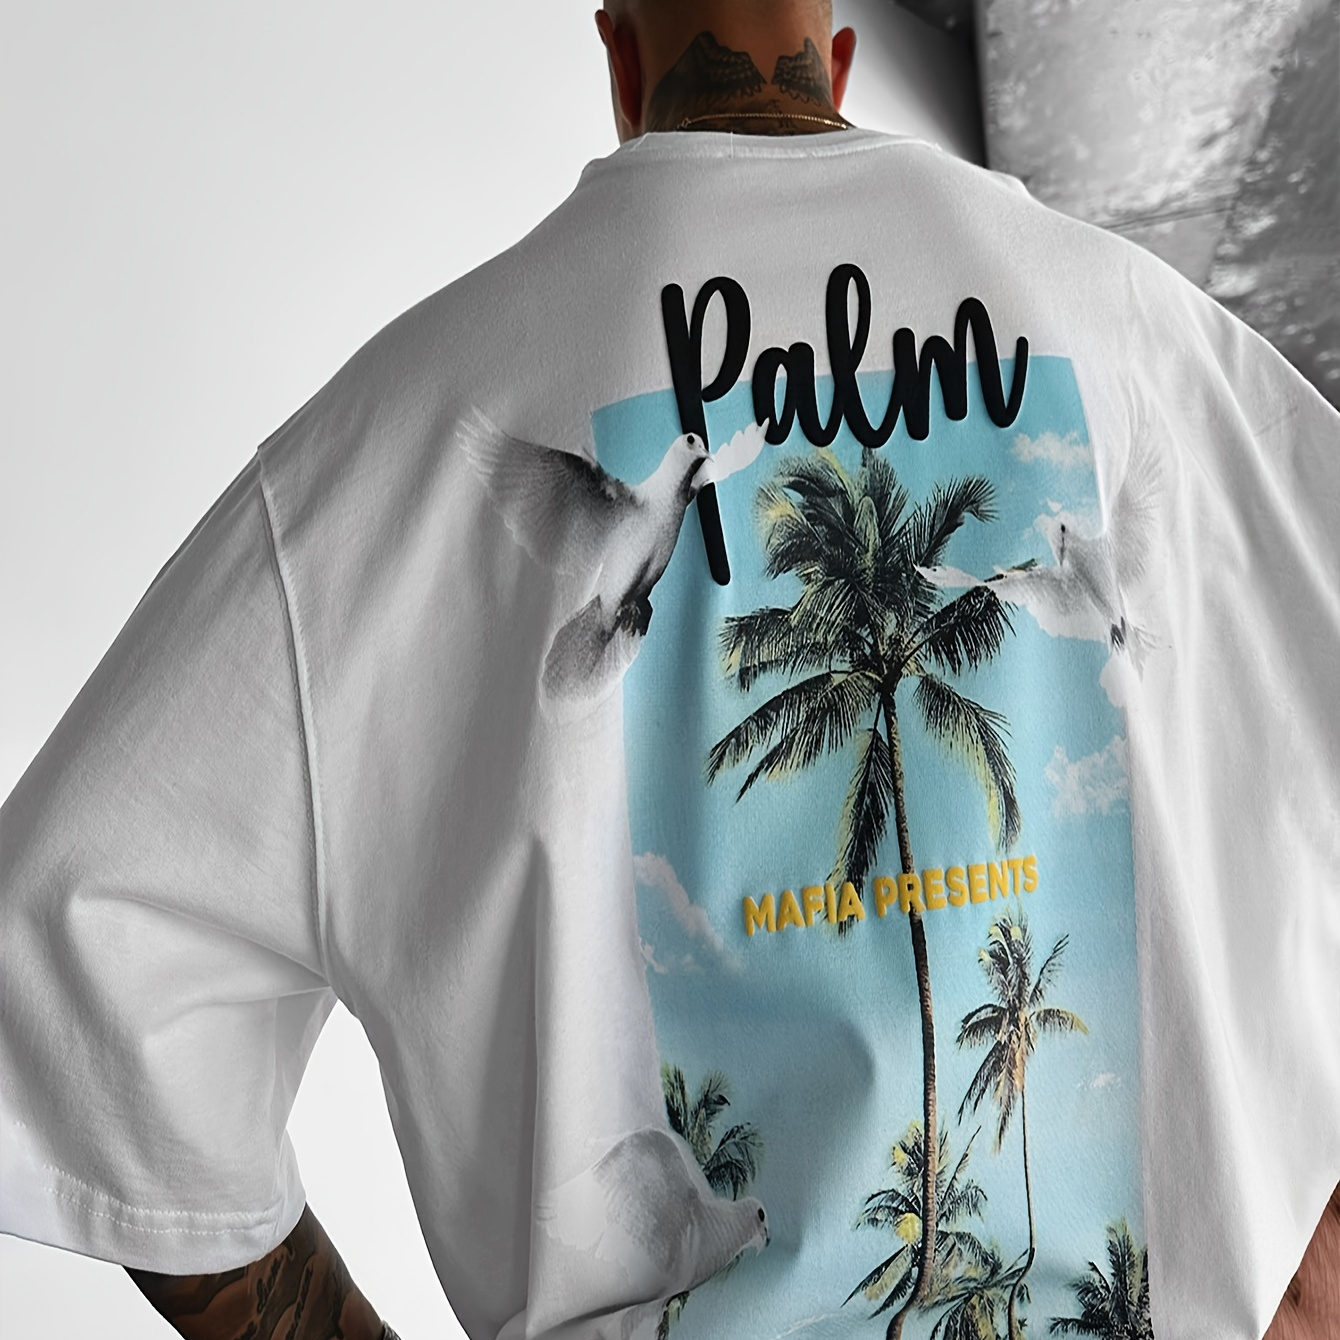 

3d Digital And Coconut Tree Pattern And Letter Print "palm Paradise" Crew Neck And Short Sleeve T-shirt, Casual And Trendy Tops For Men's Summer Leisurewear And Beach Vacation